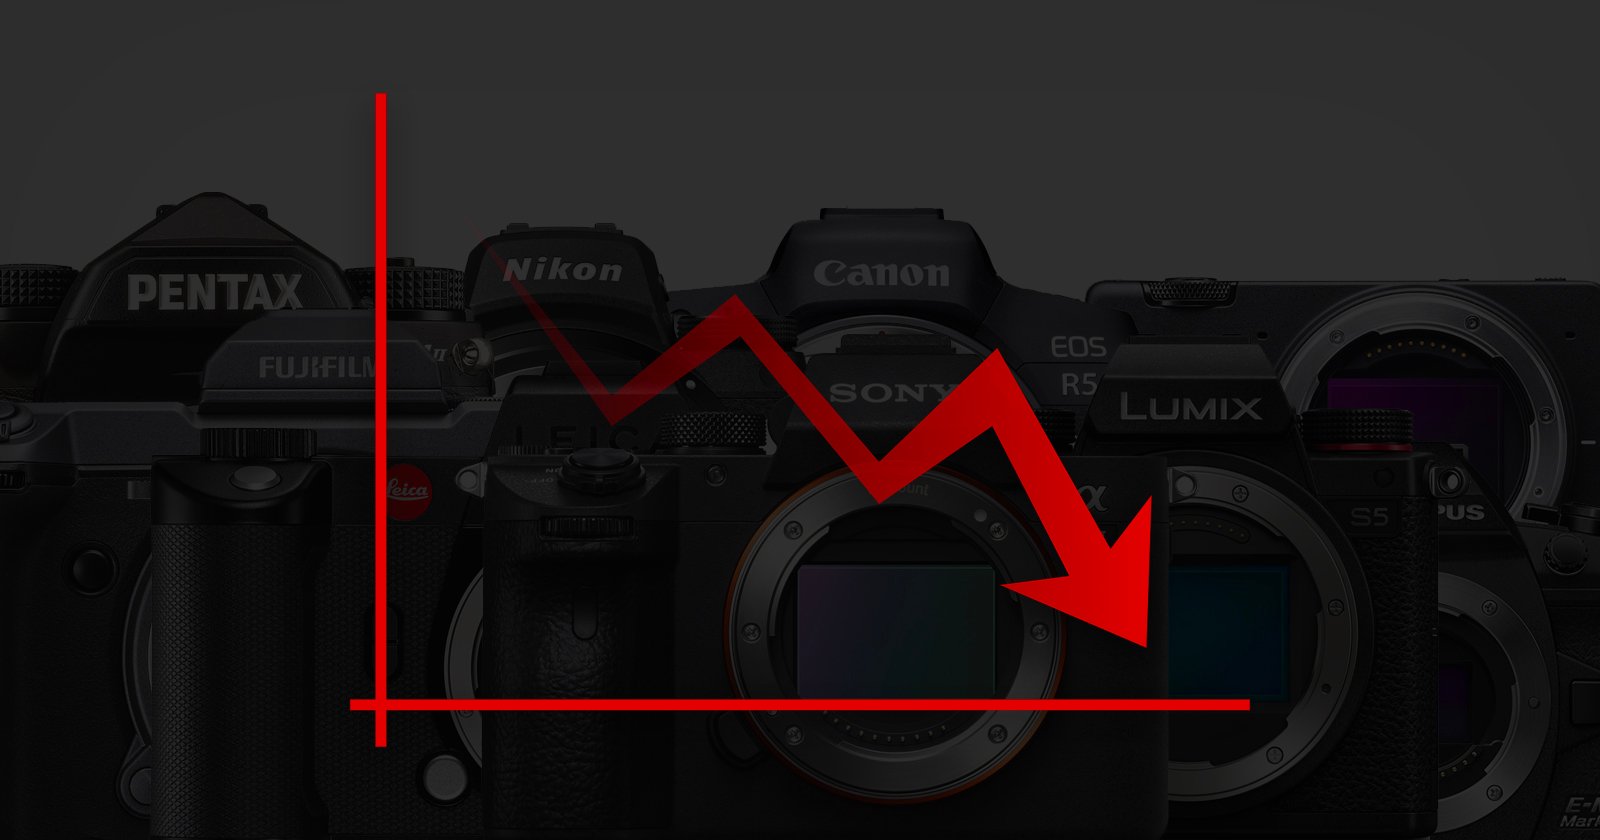 Canon-Camera-Sales-Will-Soon-Be-8-of-What-They-Were-a-Decade-Ago.jpg